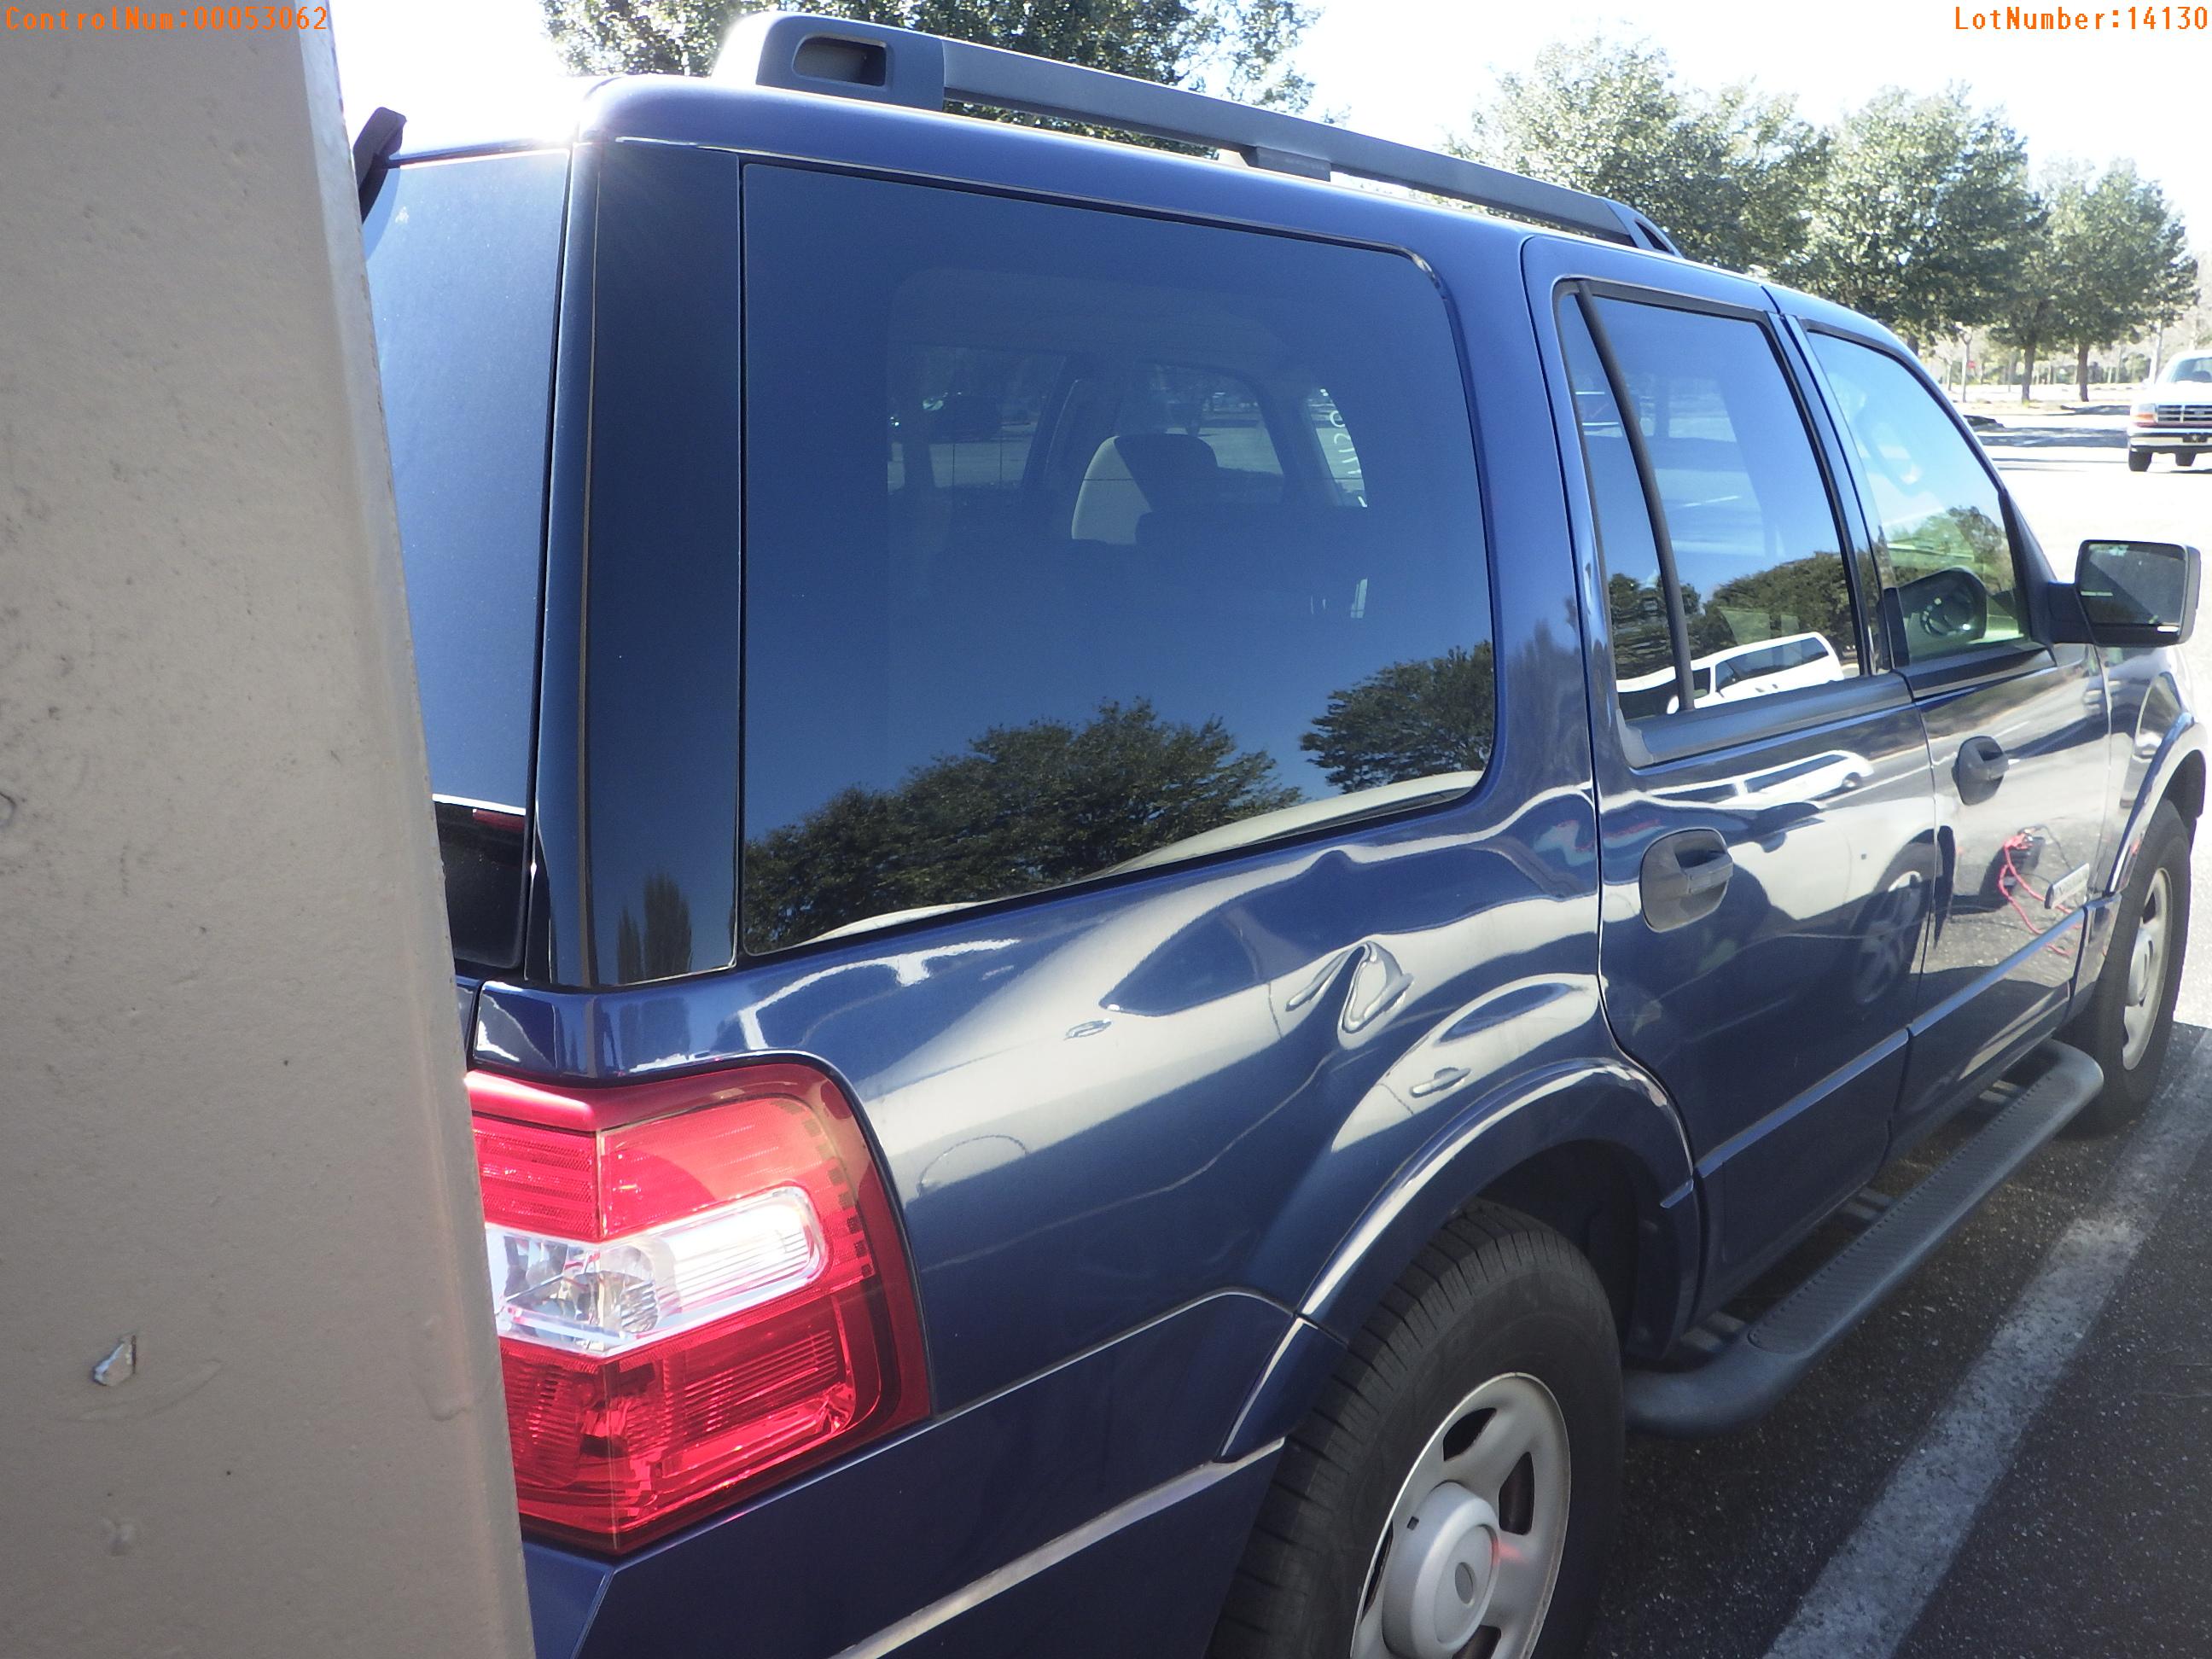 2-14130 (Cars-SUV 4D)  Seller: Florida State D.F.S. 2008 FORD EXPEDITIO